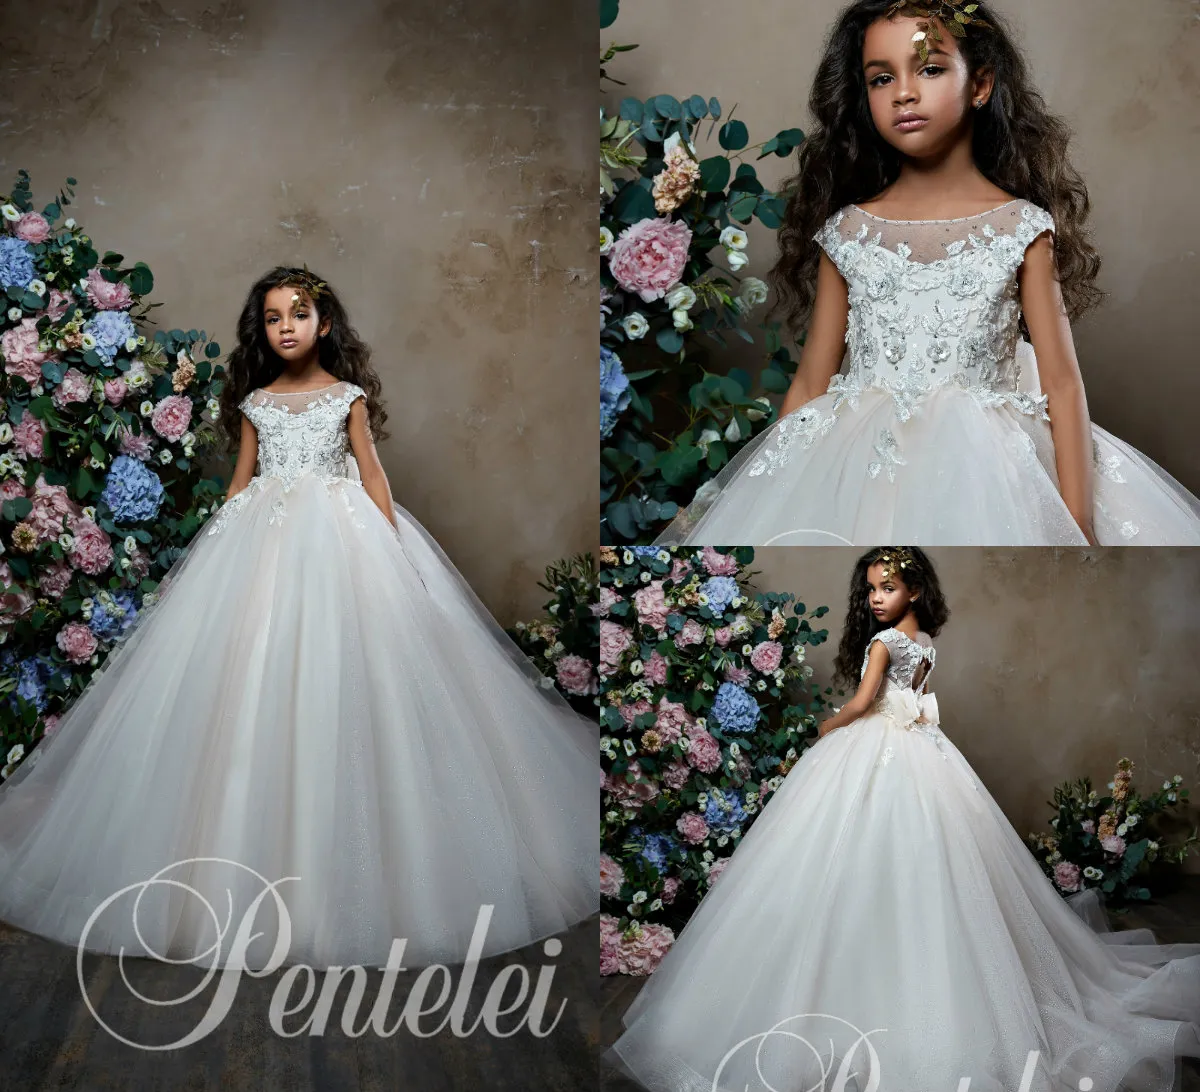 Pentelei 2019 Ball Gown Flower Girl Dresses For Weddings Jewel Neck 3D Floral Applqiues Lace Girls Pageant Dress With Bow Appliques Beaded